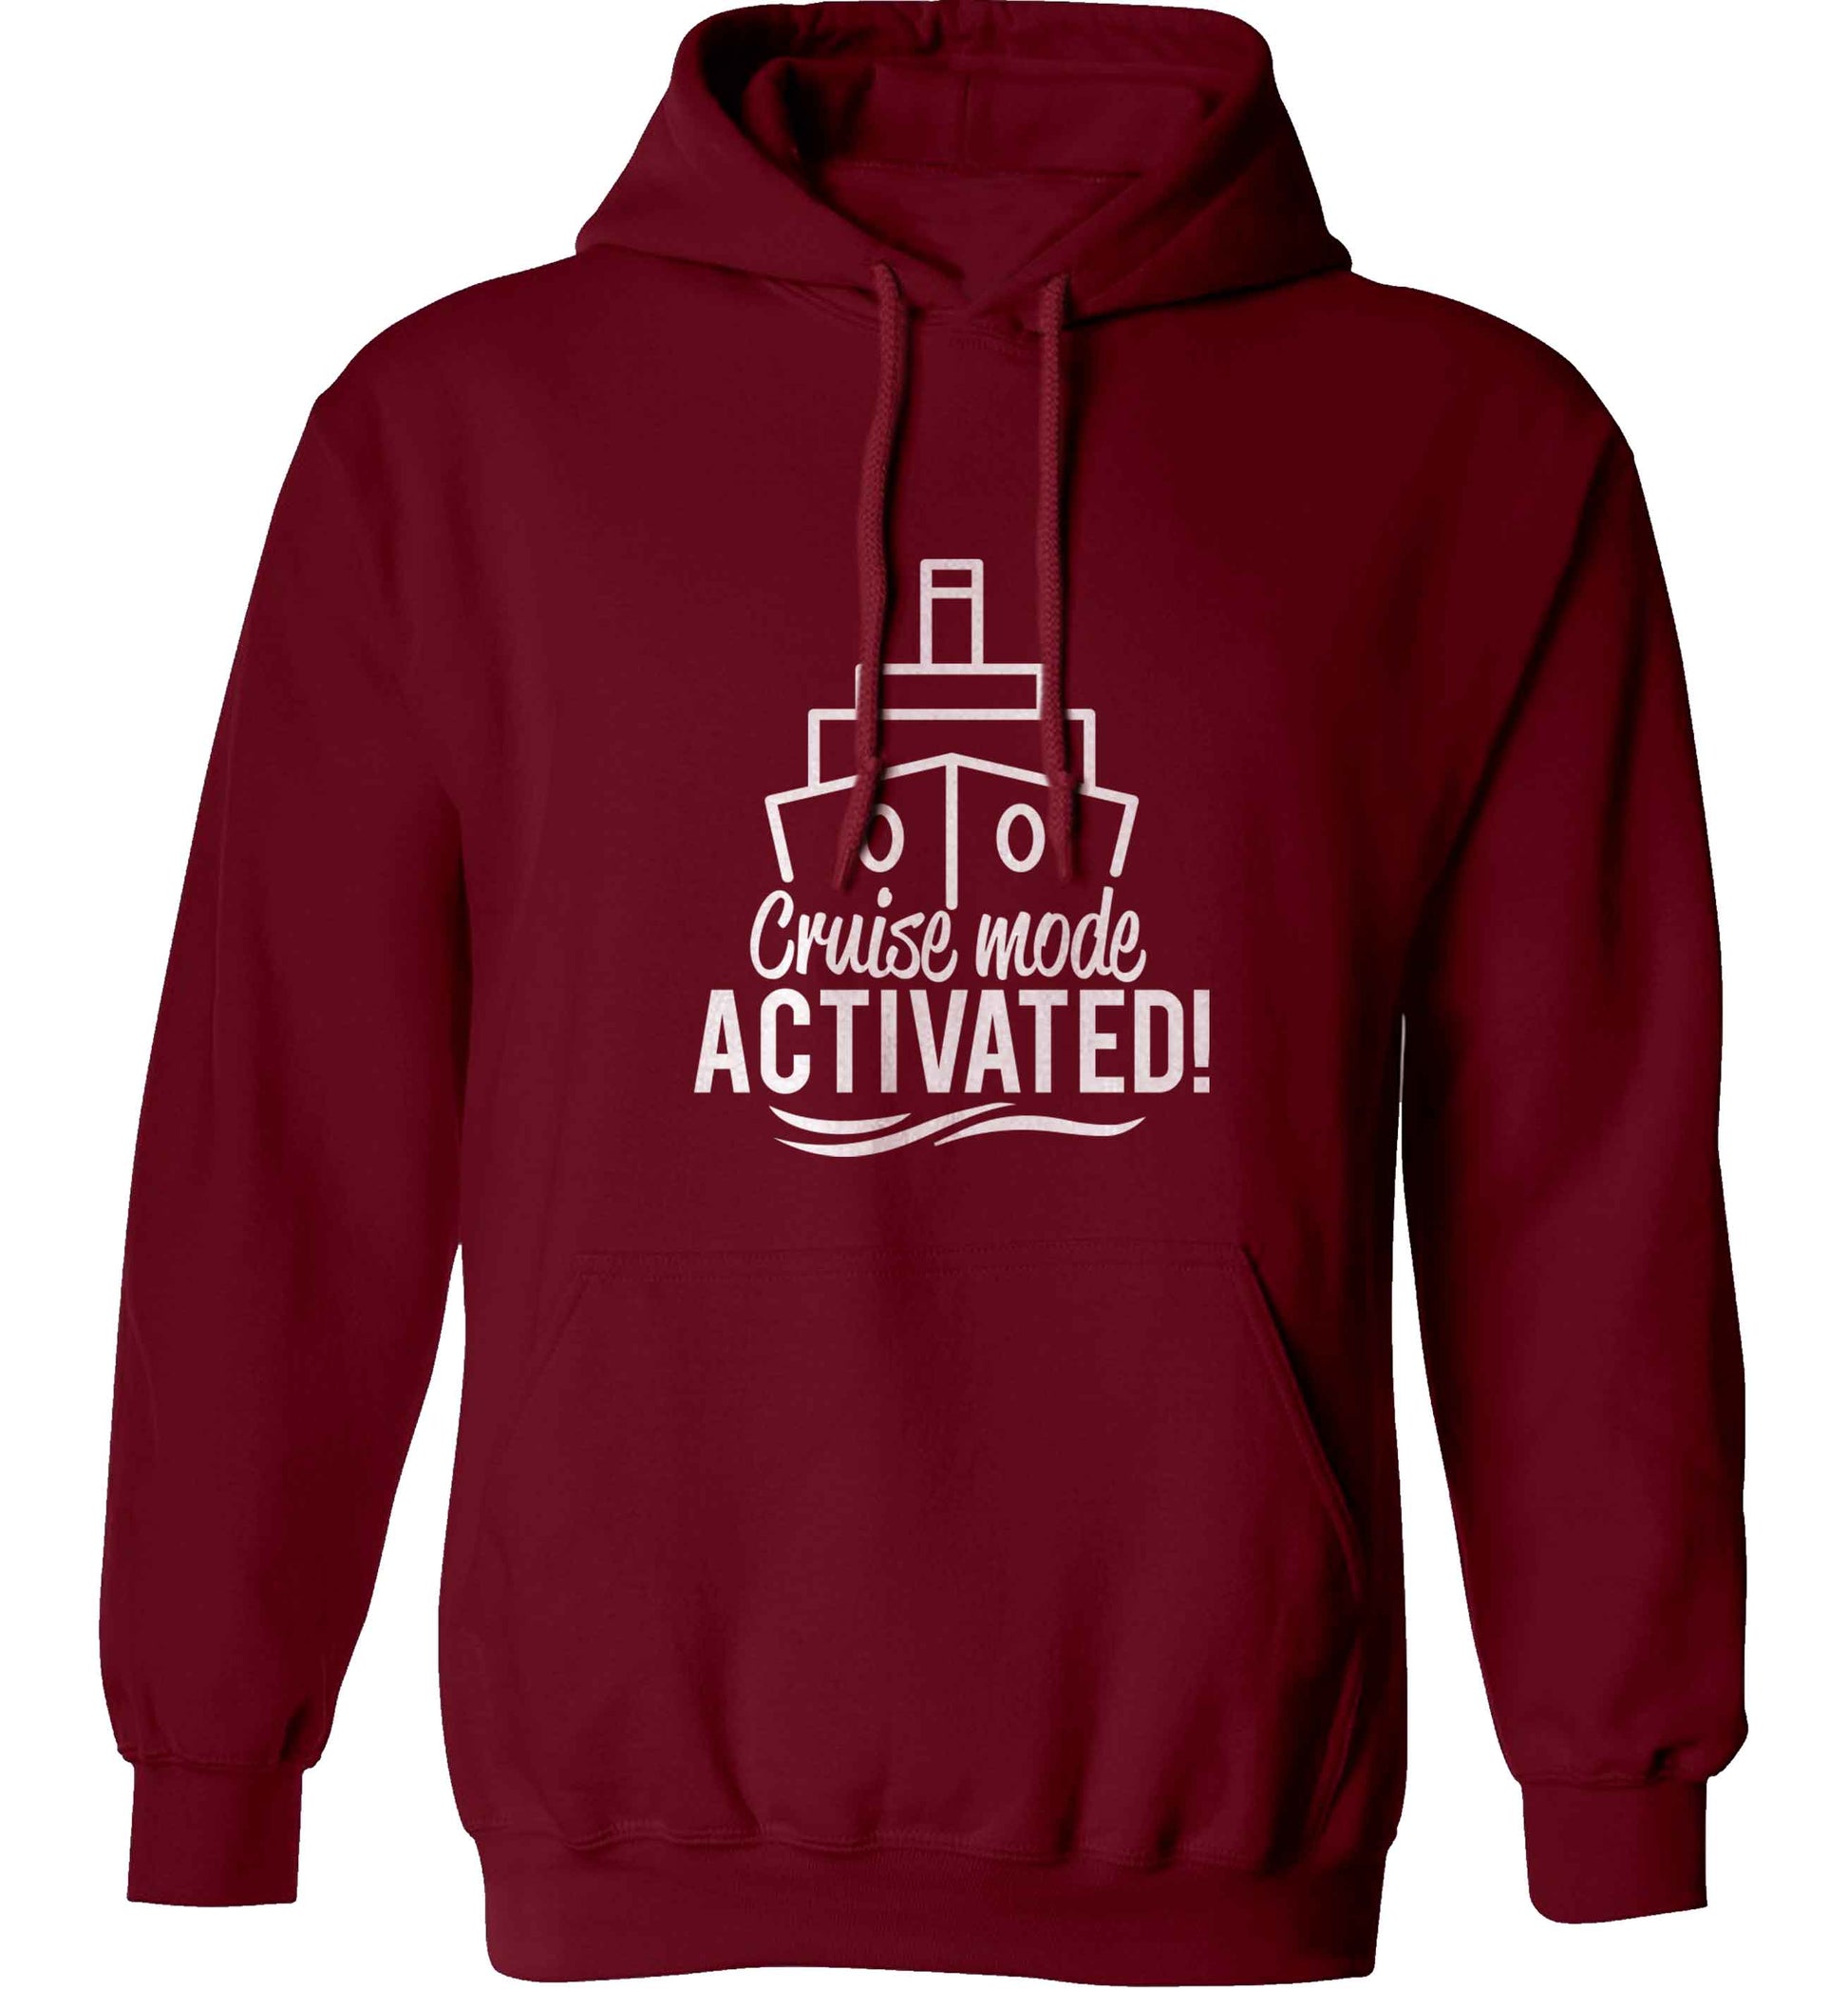 Cruise mode activated adults unisex maroon hoodie 2XL